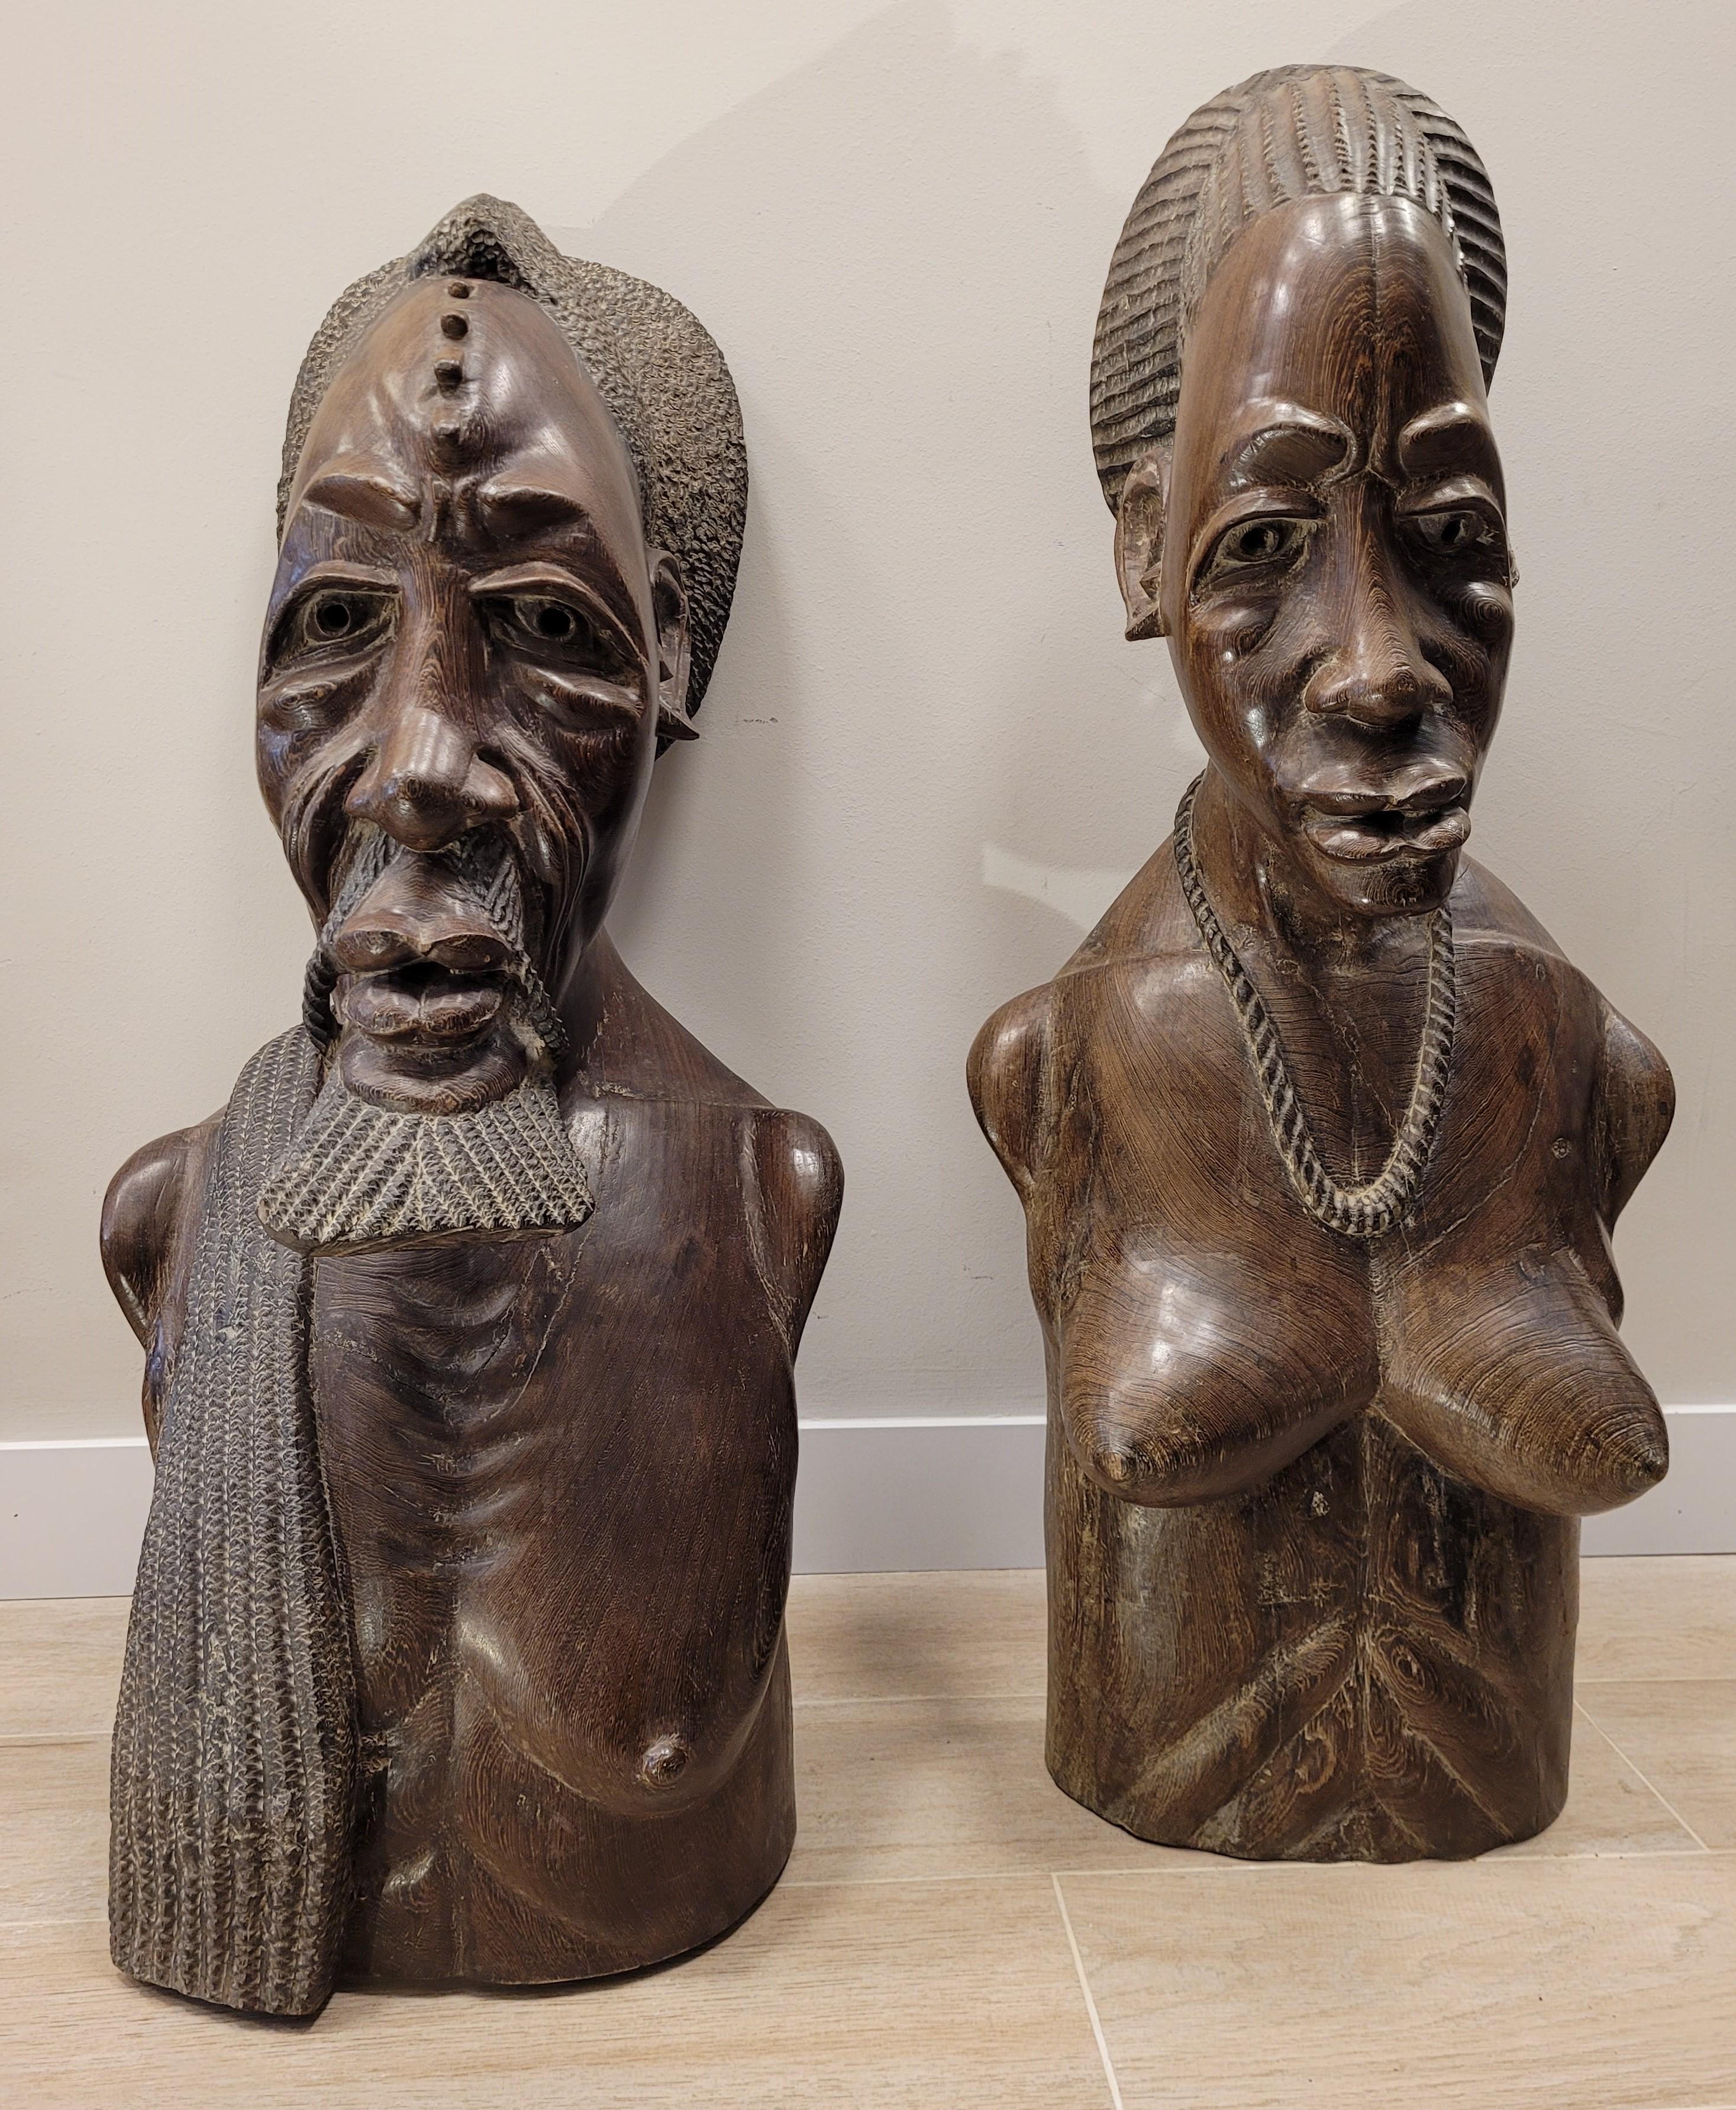 One of a kind pair of African busts, from the Congo region, made during the 1940s-1950s of the previous century, possibly a French artist

Both present the characteristic features of the race to which they belong: triangular and drooping eyes, a